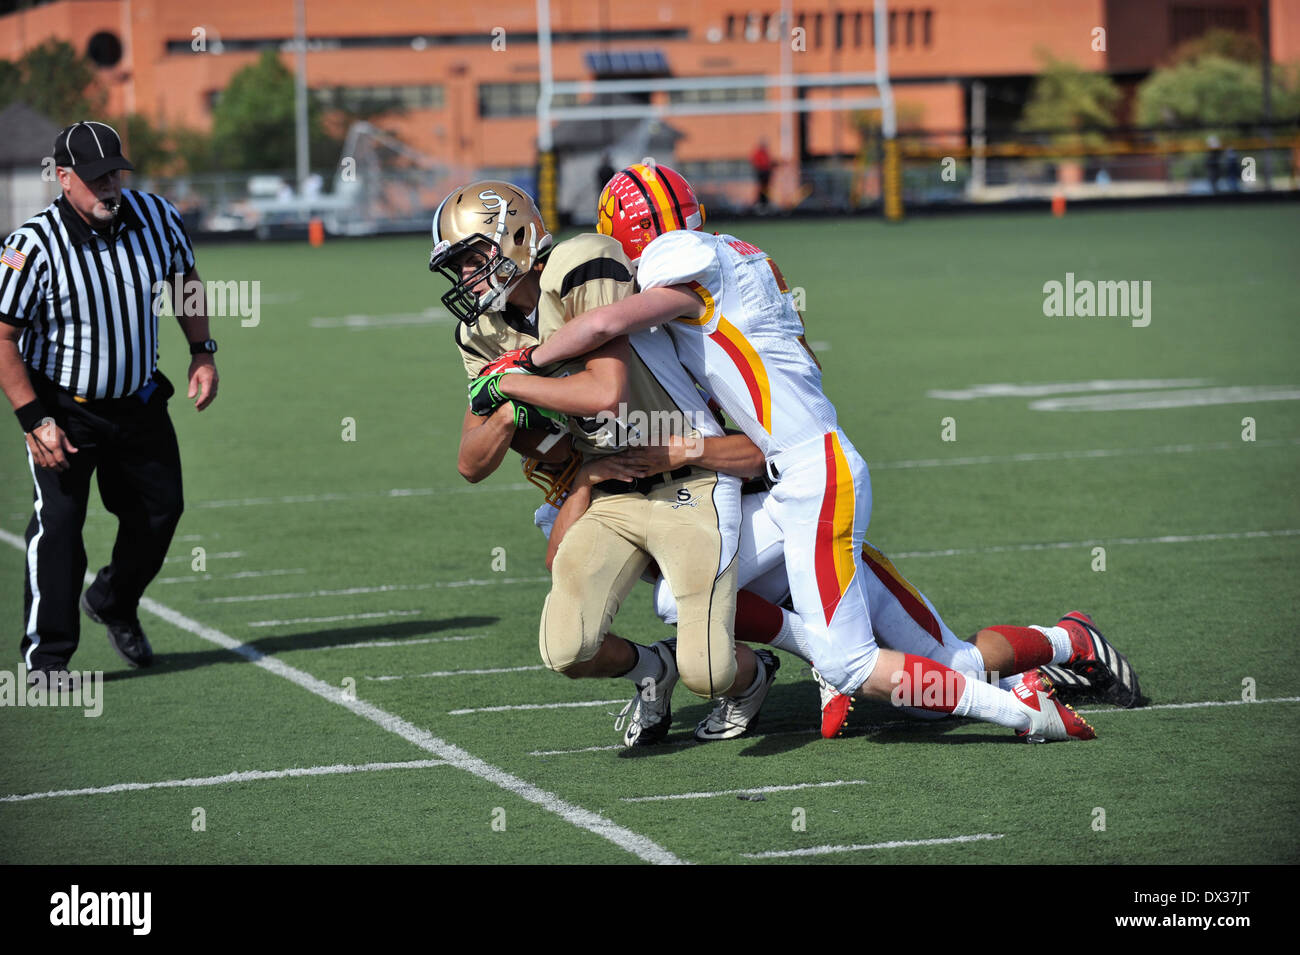 Sport Football Wide receiver tackled down out of bounds by a pair of defenders. USA. Stock Photo